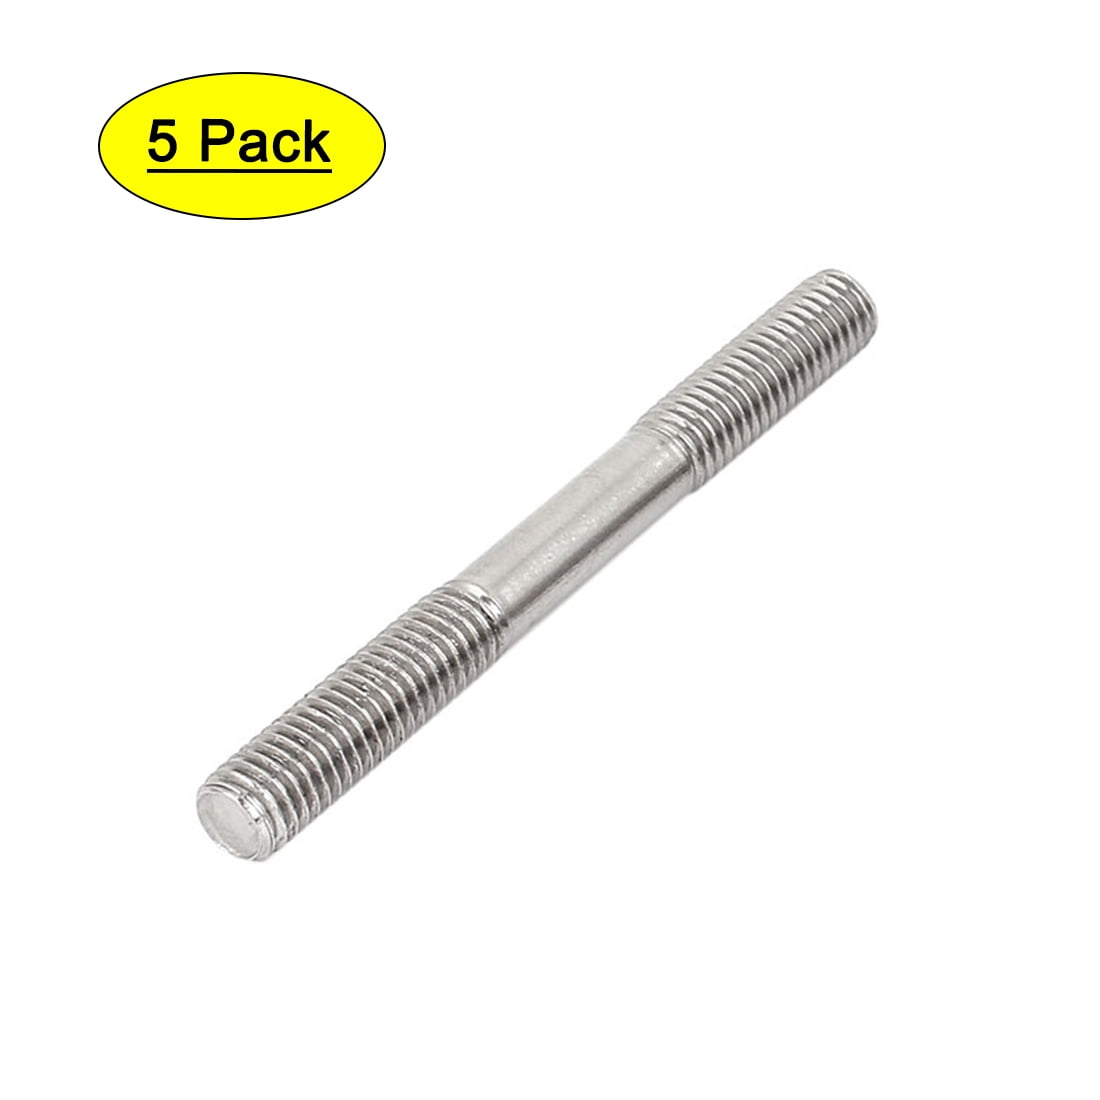 Double End 304 Stainless Steel Threaded Rod Stud 1" x 23" Coarse Thread 